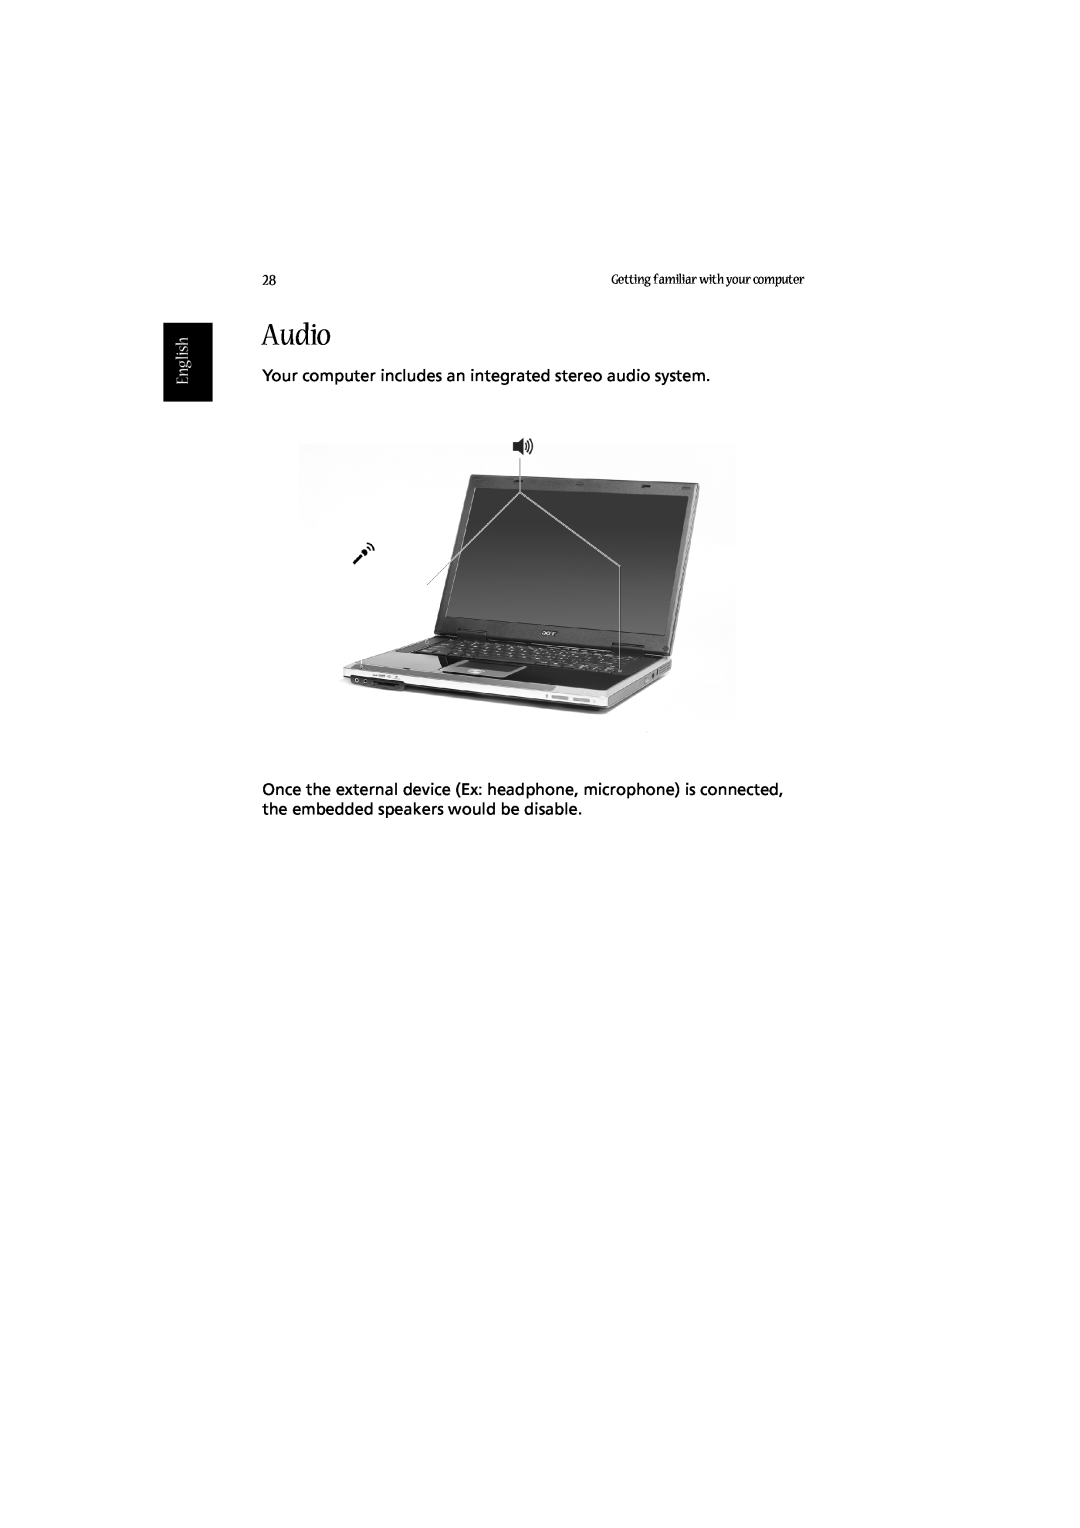 Acer 2010 manual Audio, English, Your computer includes an integrated stereo audio system 